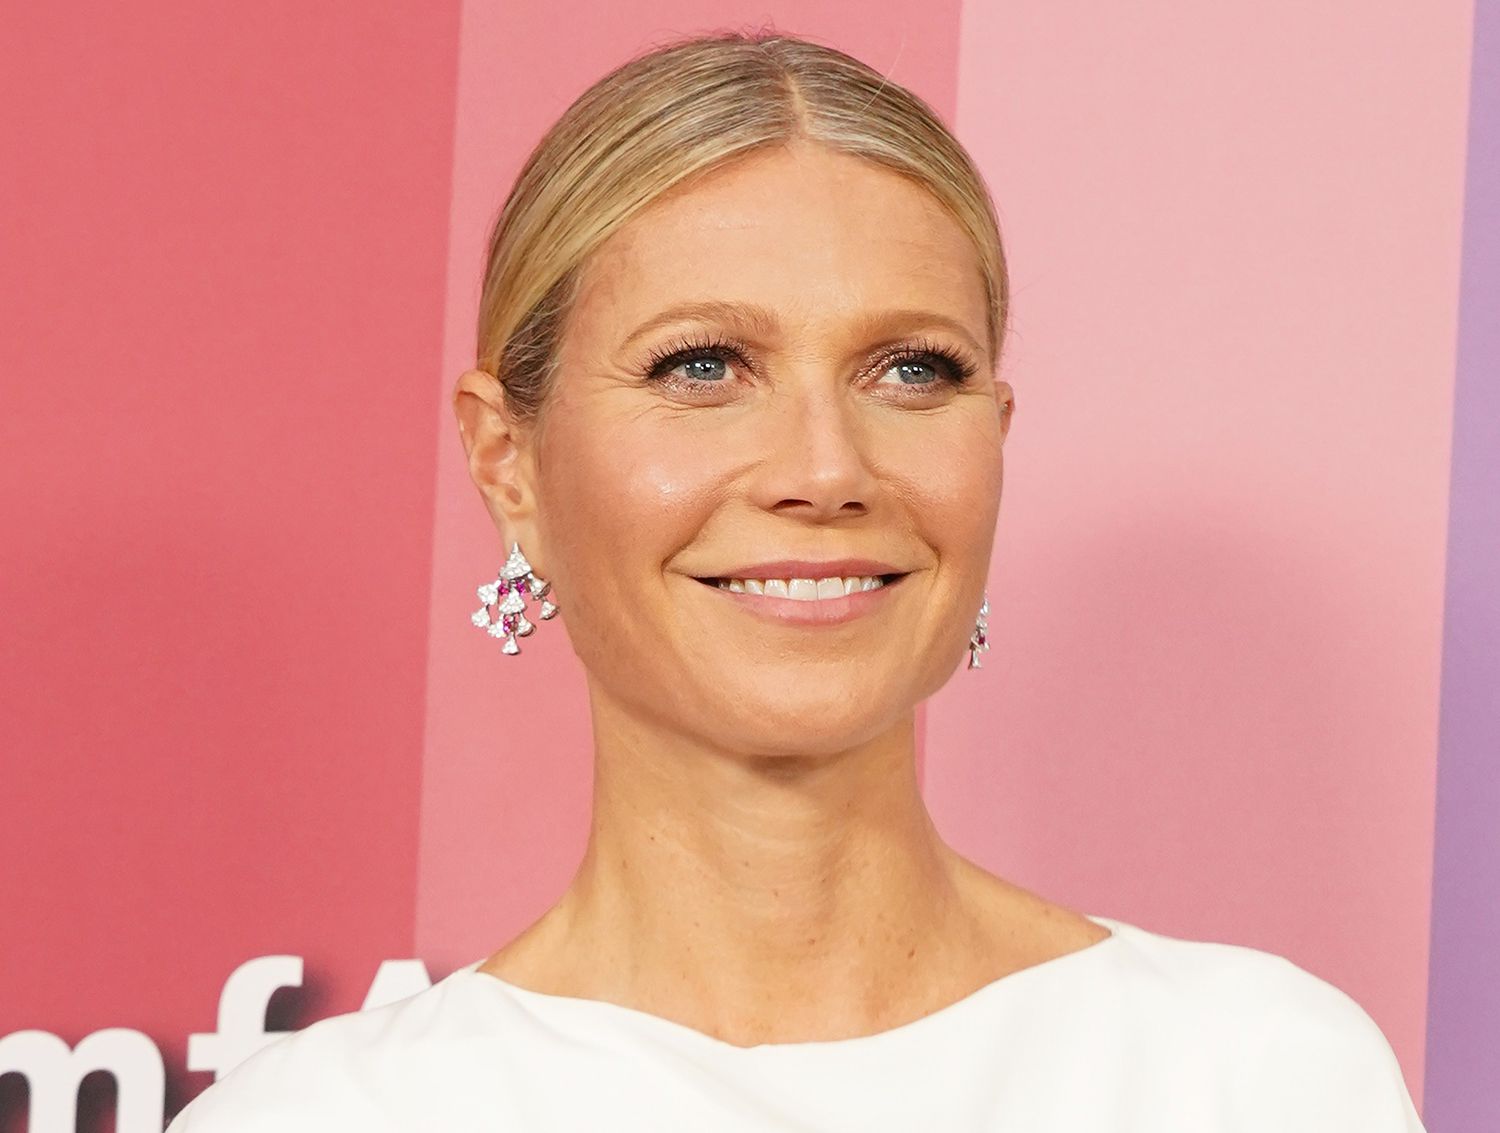 Gwyneth Paltrow wearing a white outfit